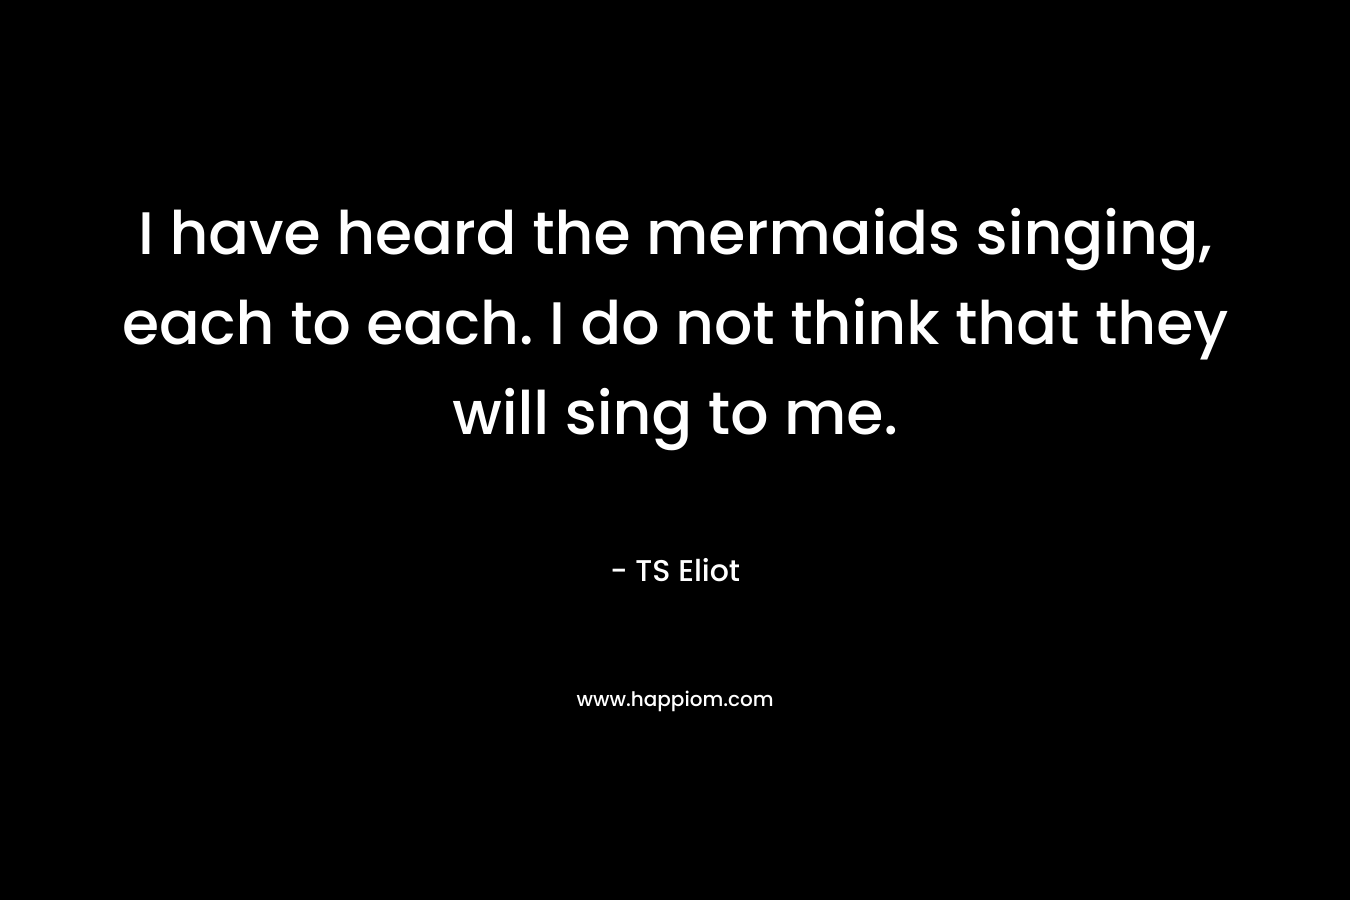 I have heard the mermaids singing, each to each. I do not think that they will sing to me.